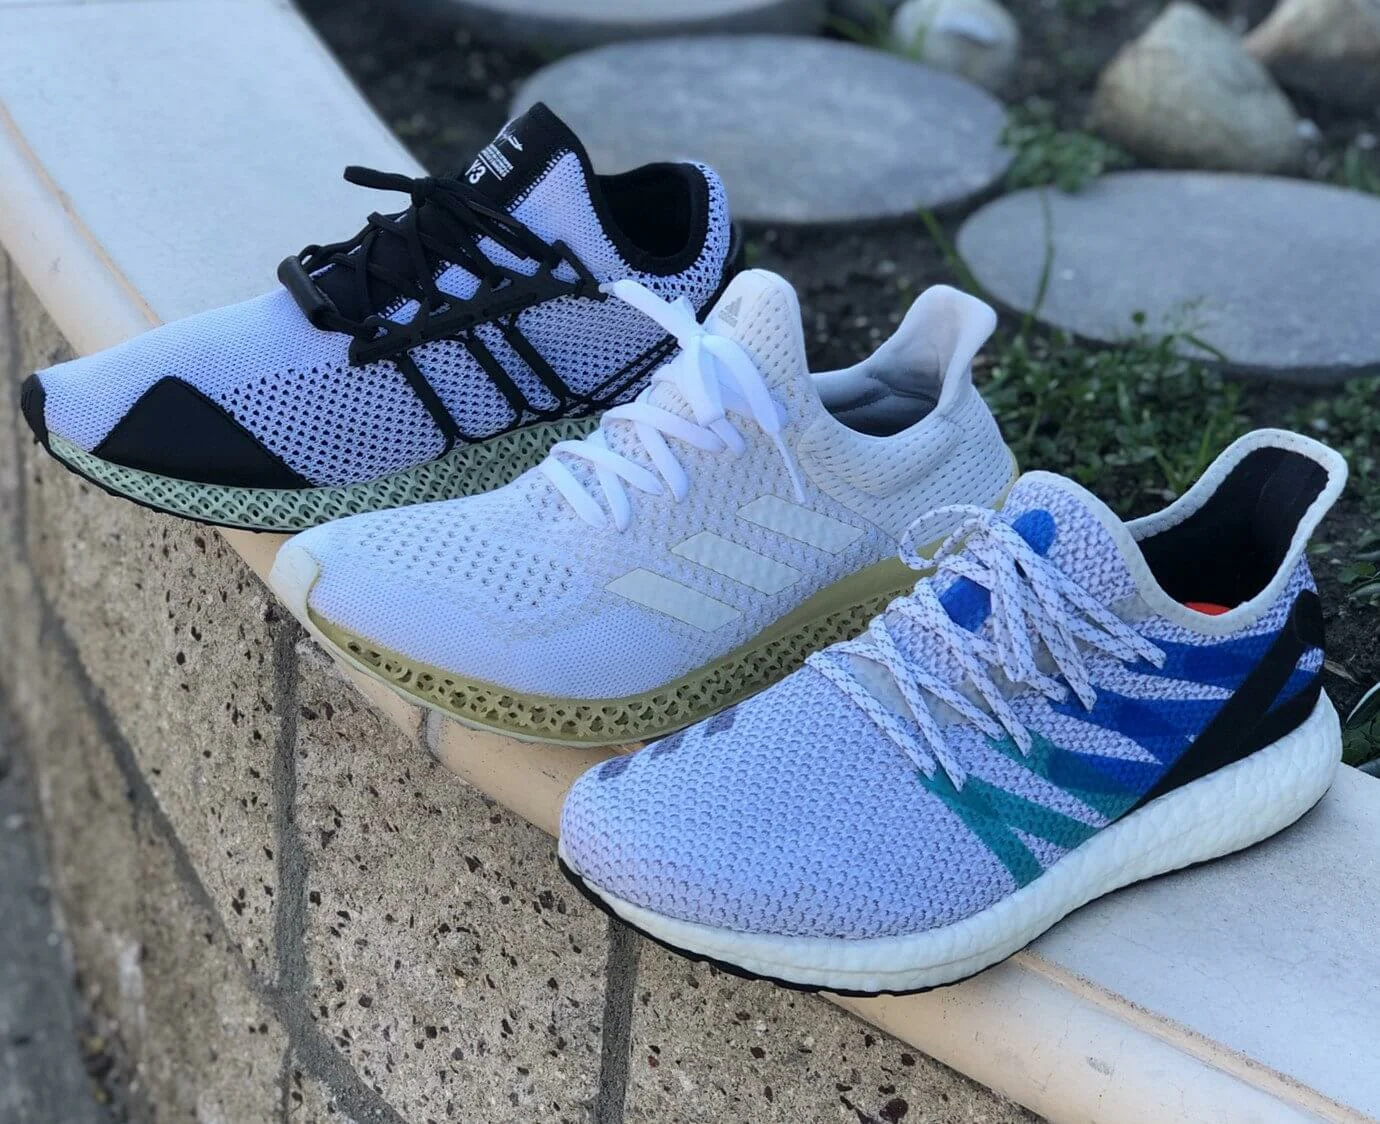 3D printed Adidas shoes